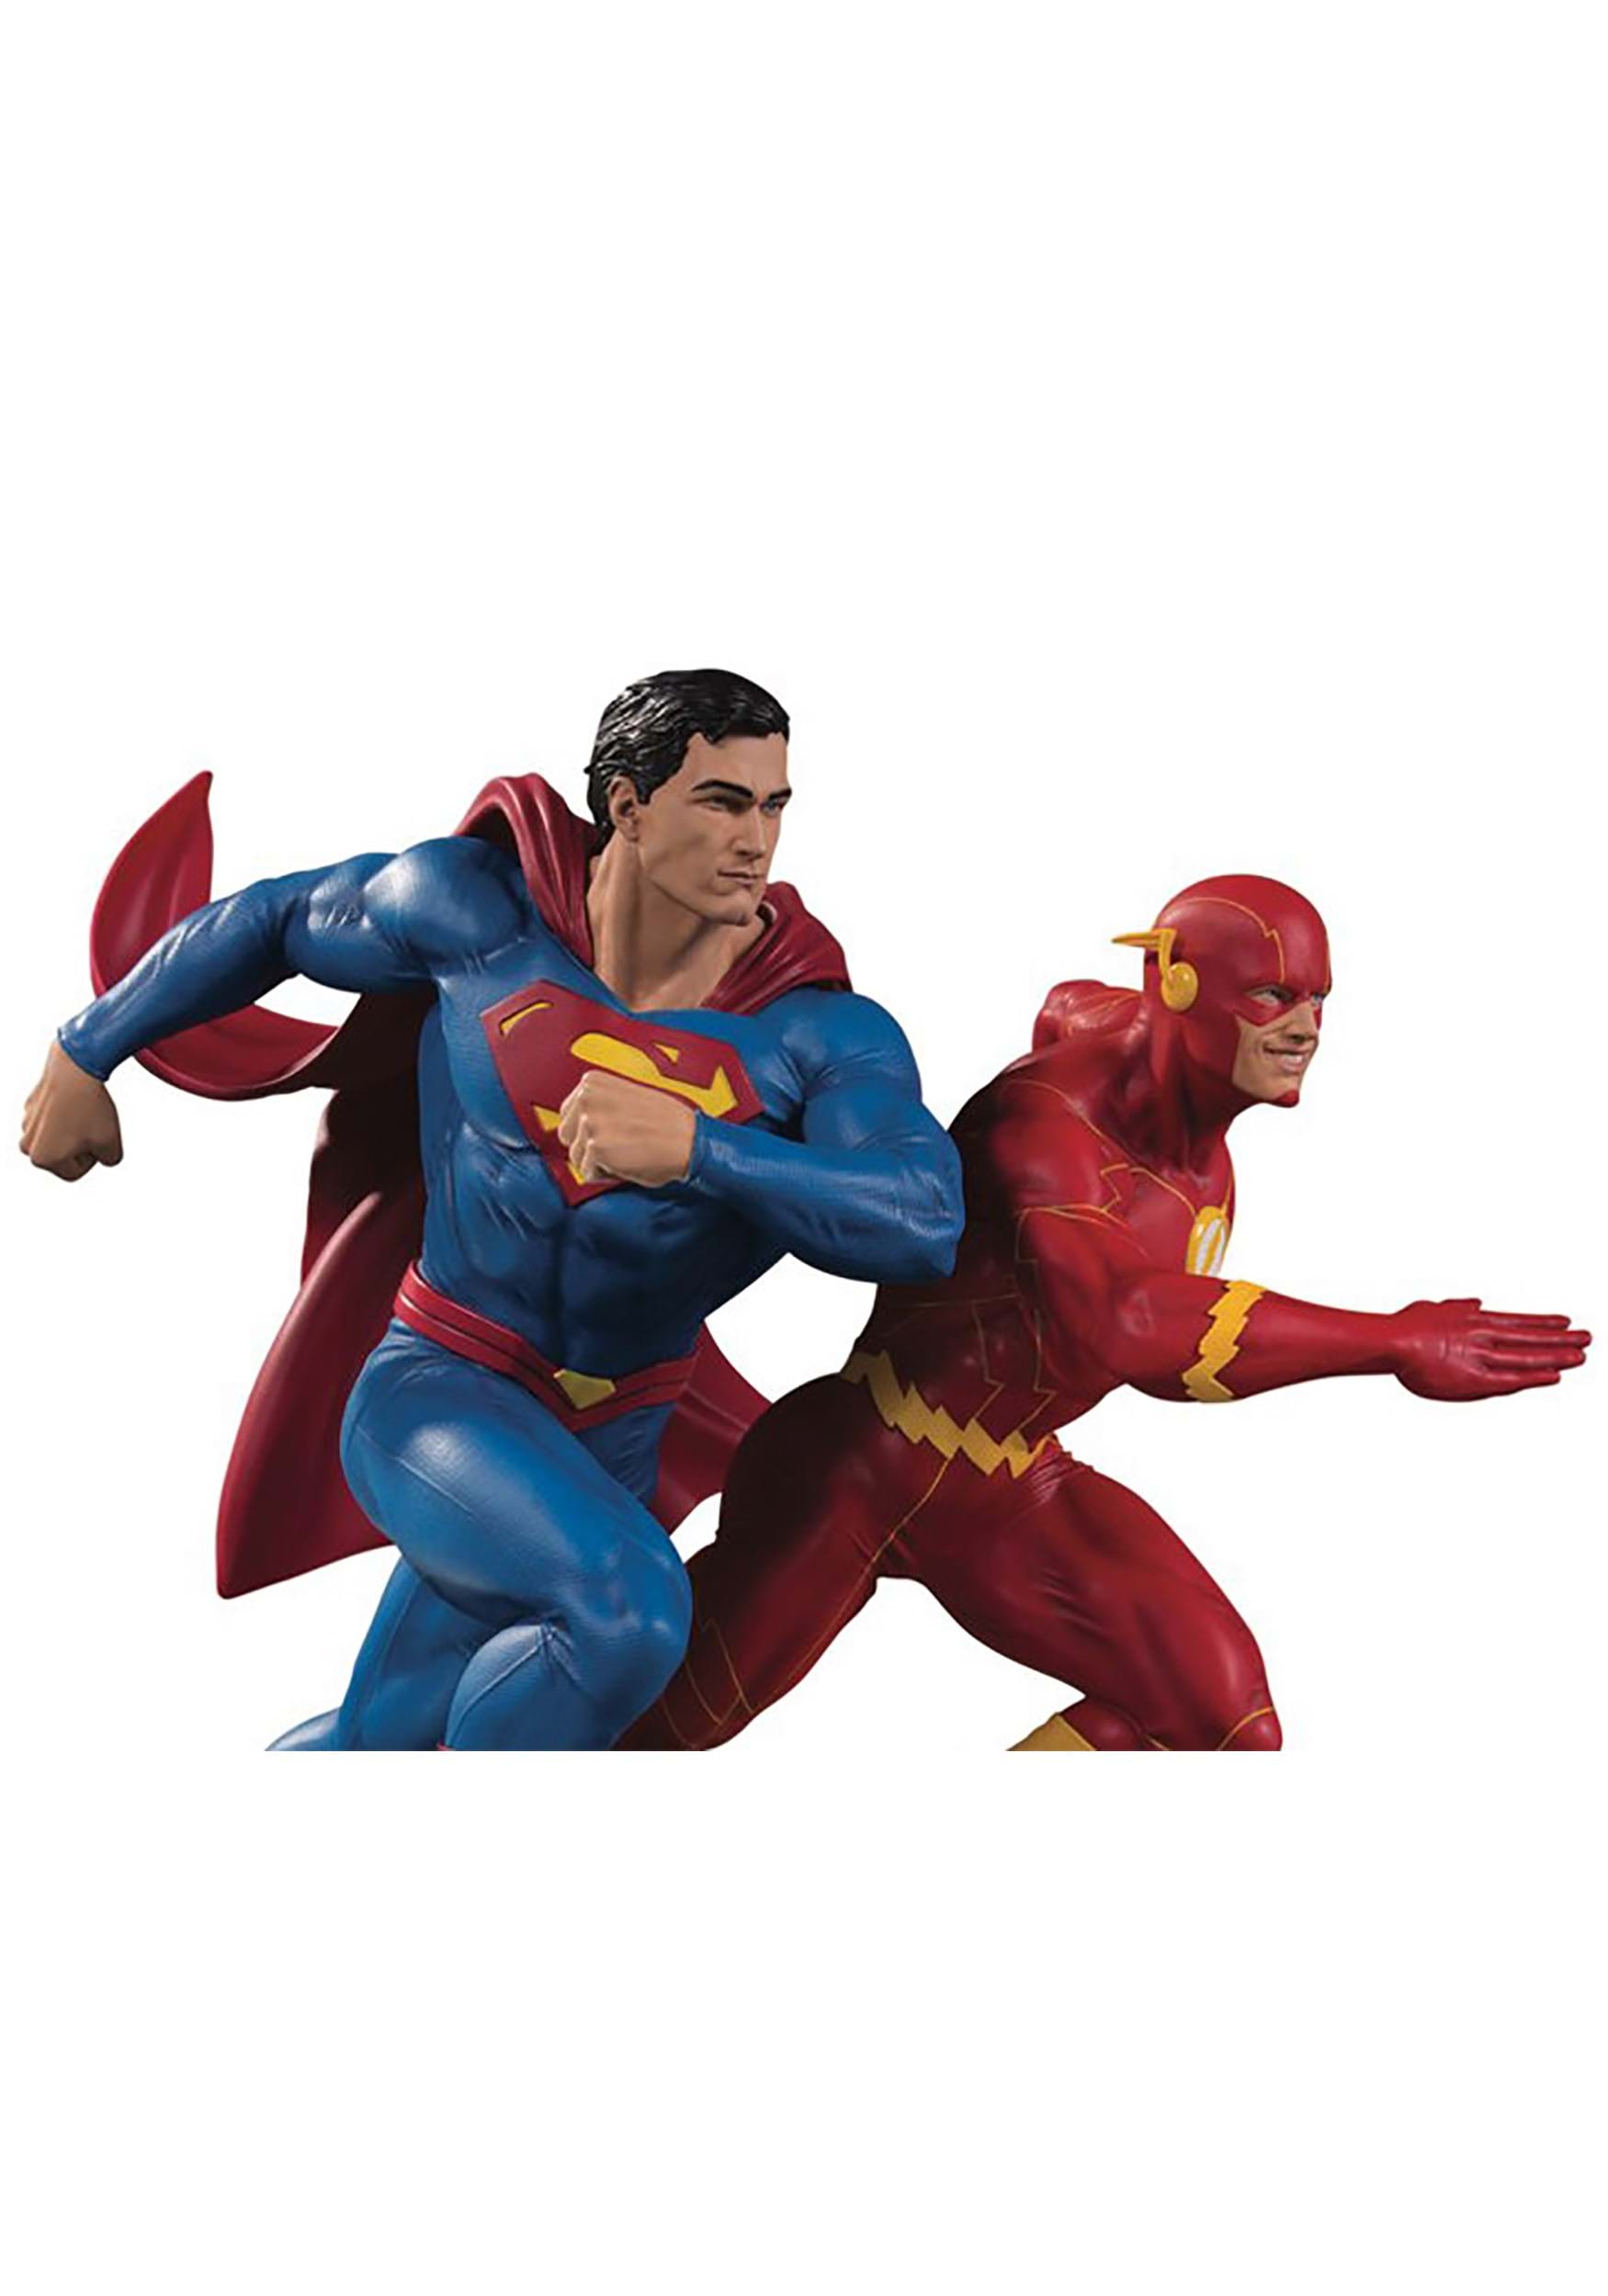 DC Gallery Superman vs. Flash Racing 2nd Edition Statue